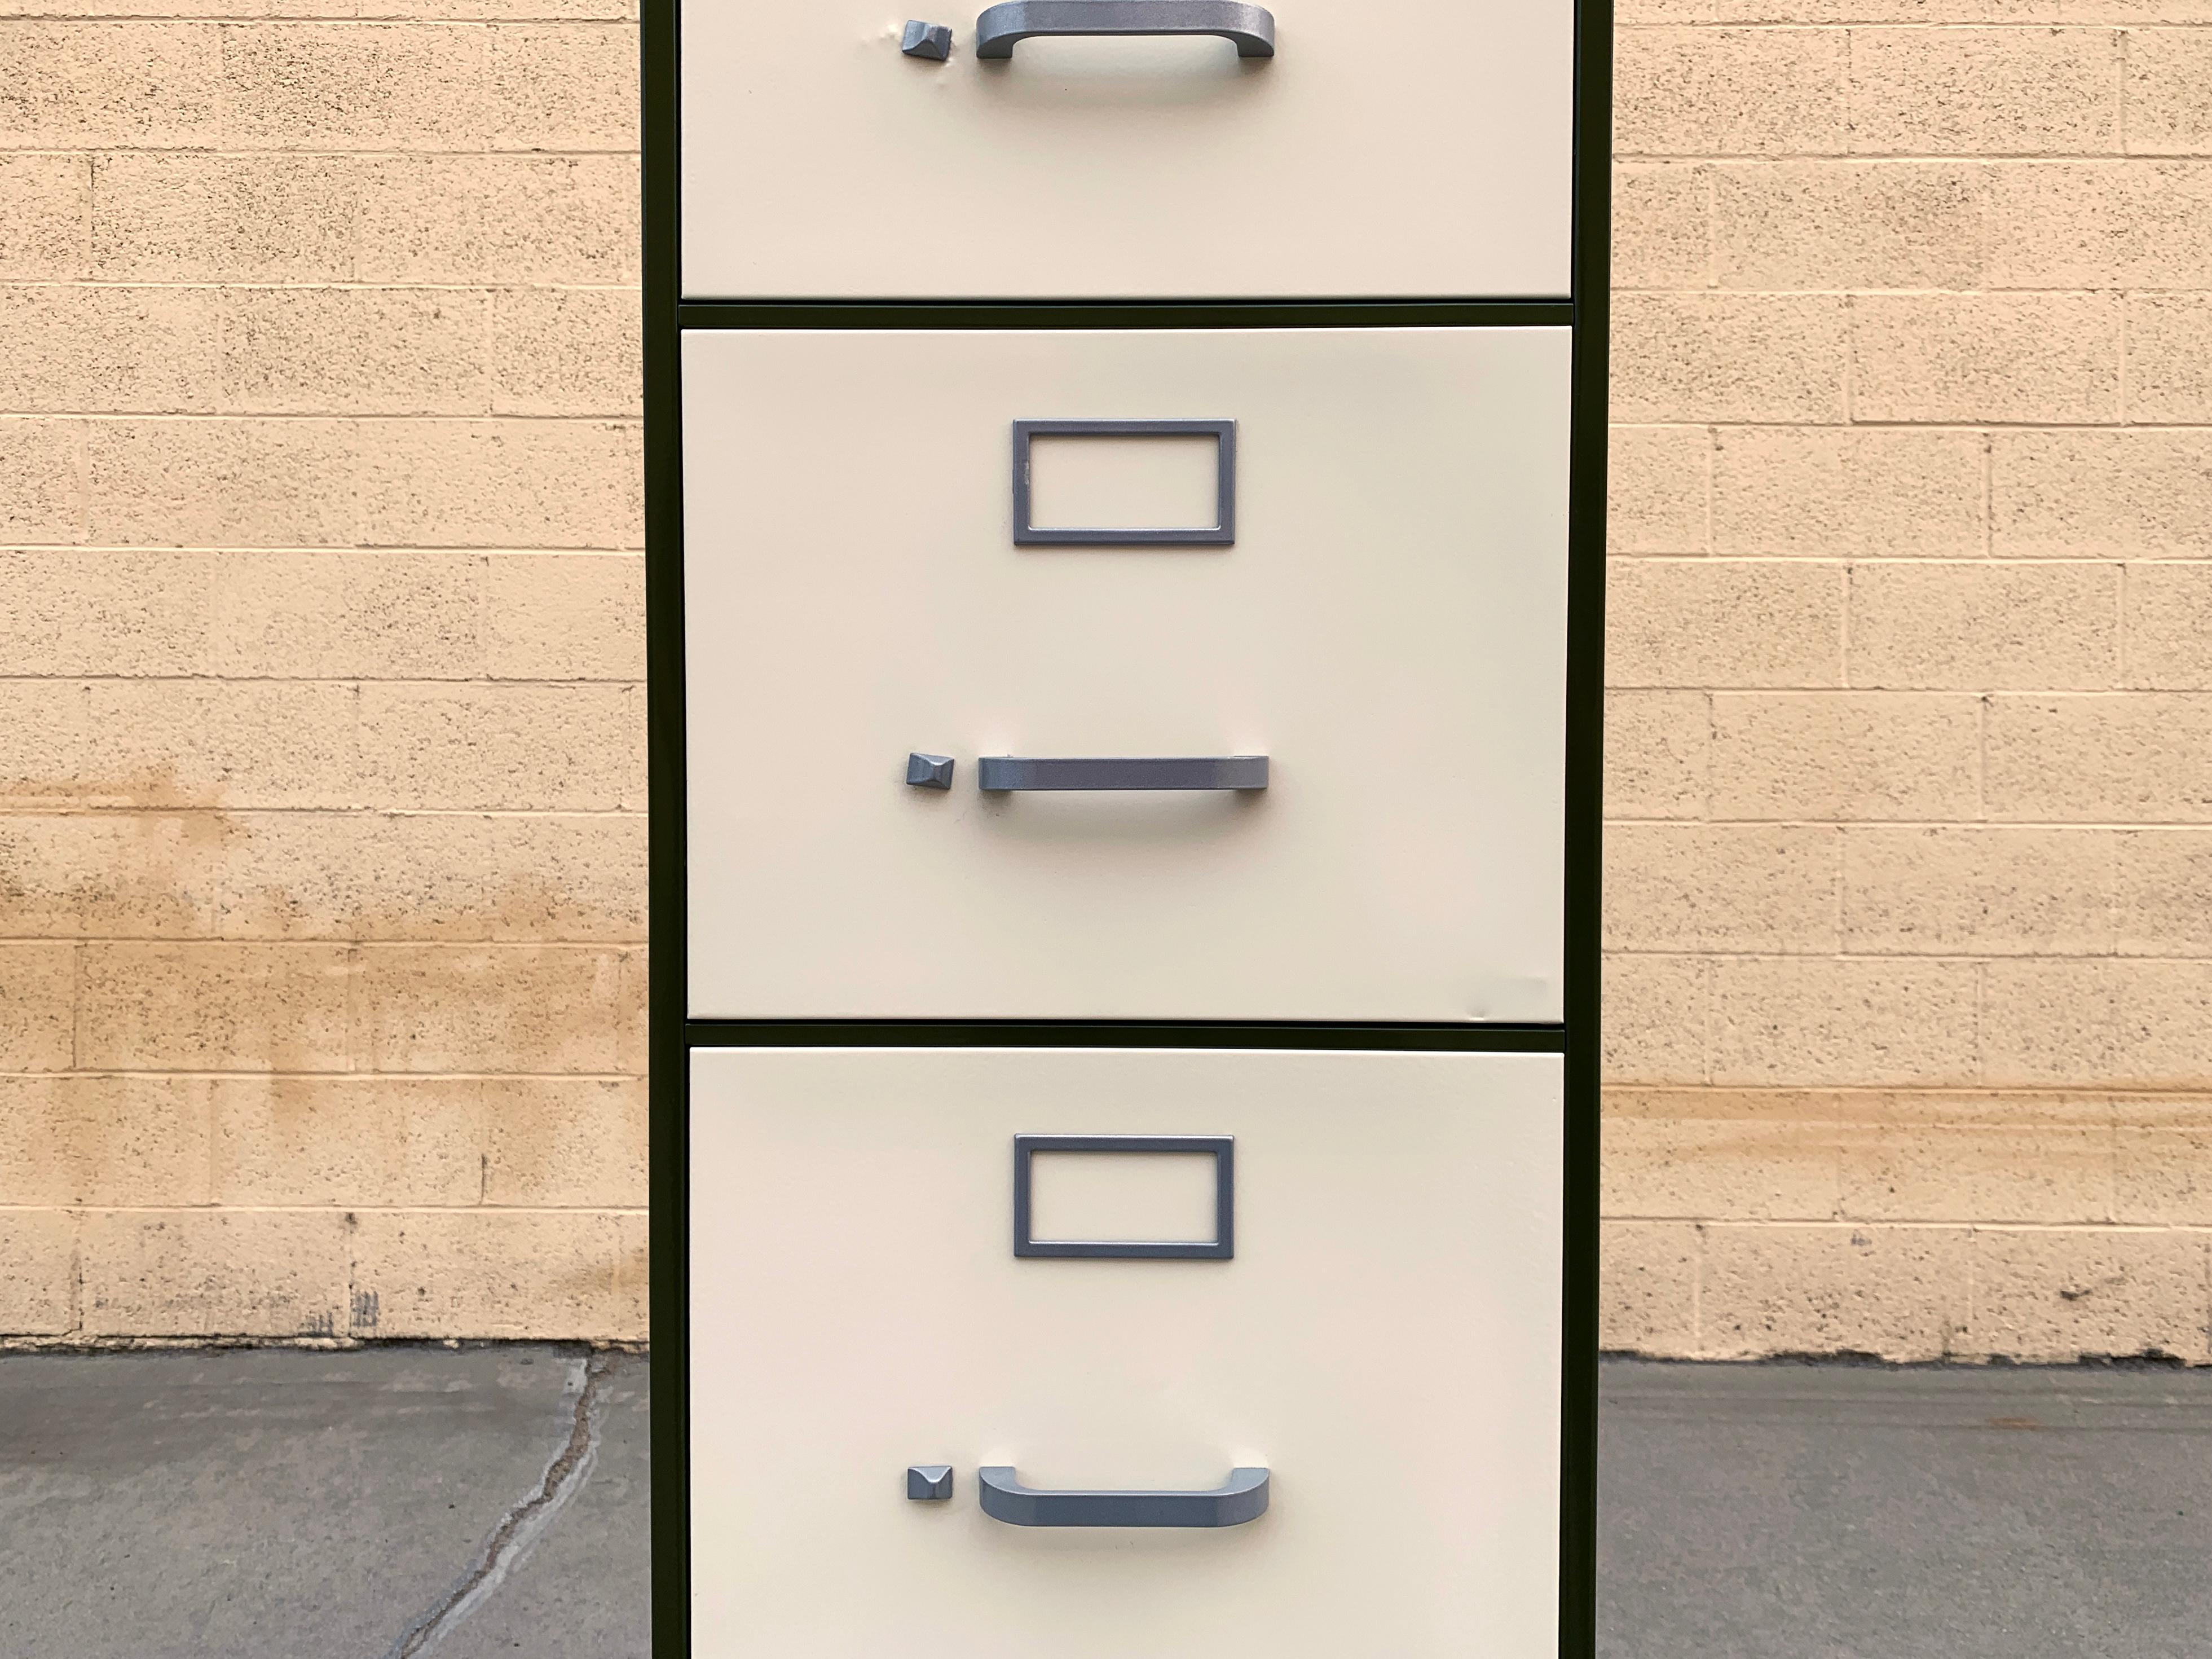 1970s tanker style steel file cabinet by Steelcase. Refinished in two-tone Army Green frame (RAL6003) and Pearl drawers with Metallic Silver hardware. Vertical 5-drawer configuration. In great vintage condition, 8/10.

Dimensions: 15